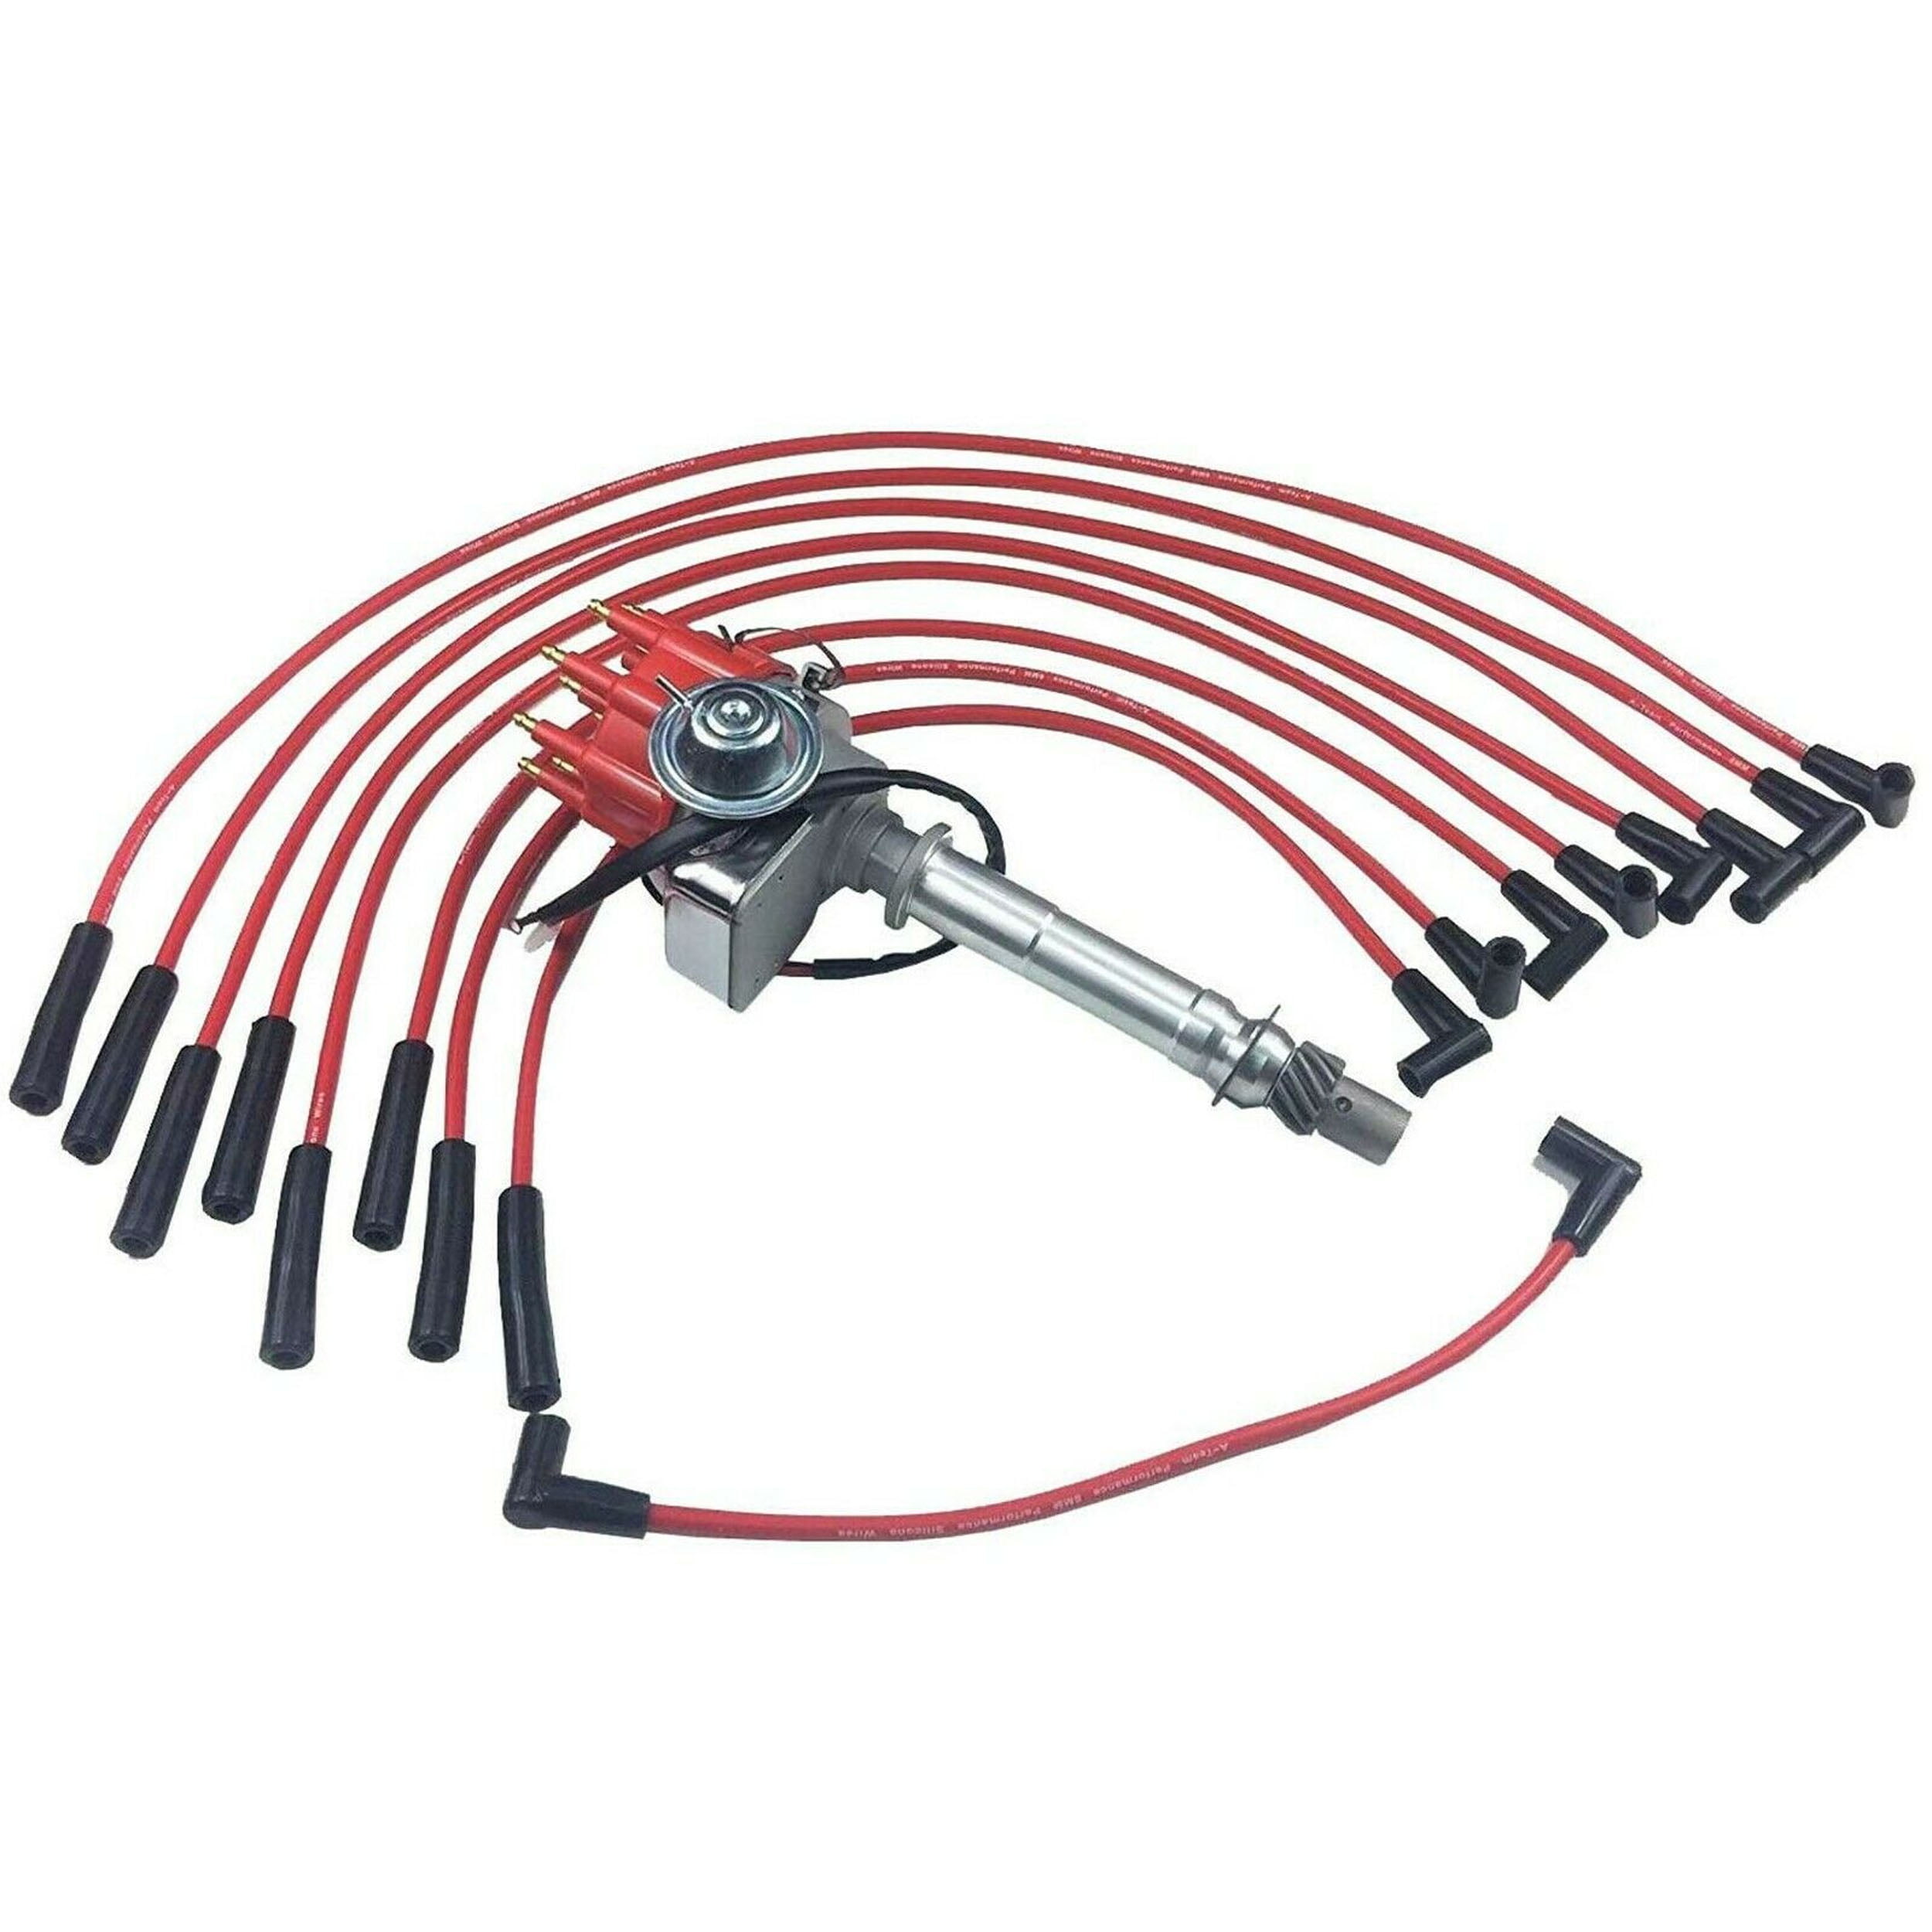 8MM HEI Spiral Core SPARK PLUG WIRES For BBC CHEVY GMC Chevrolet 396-427-454 